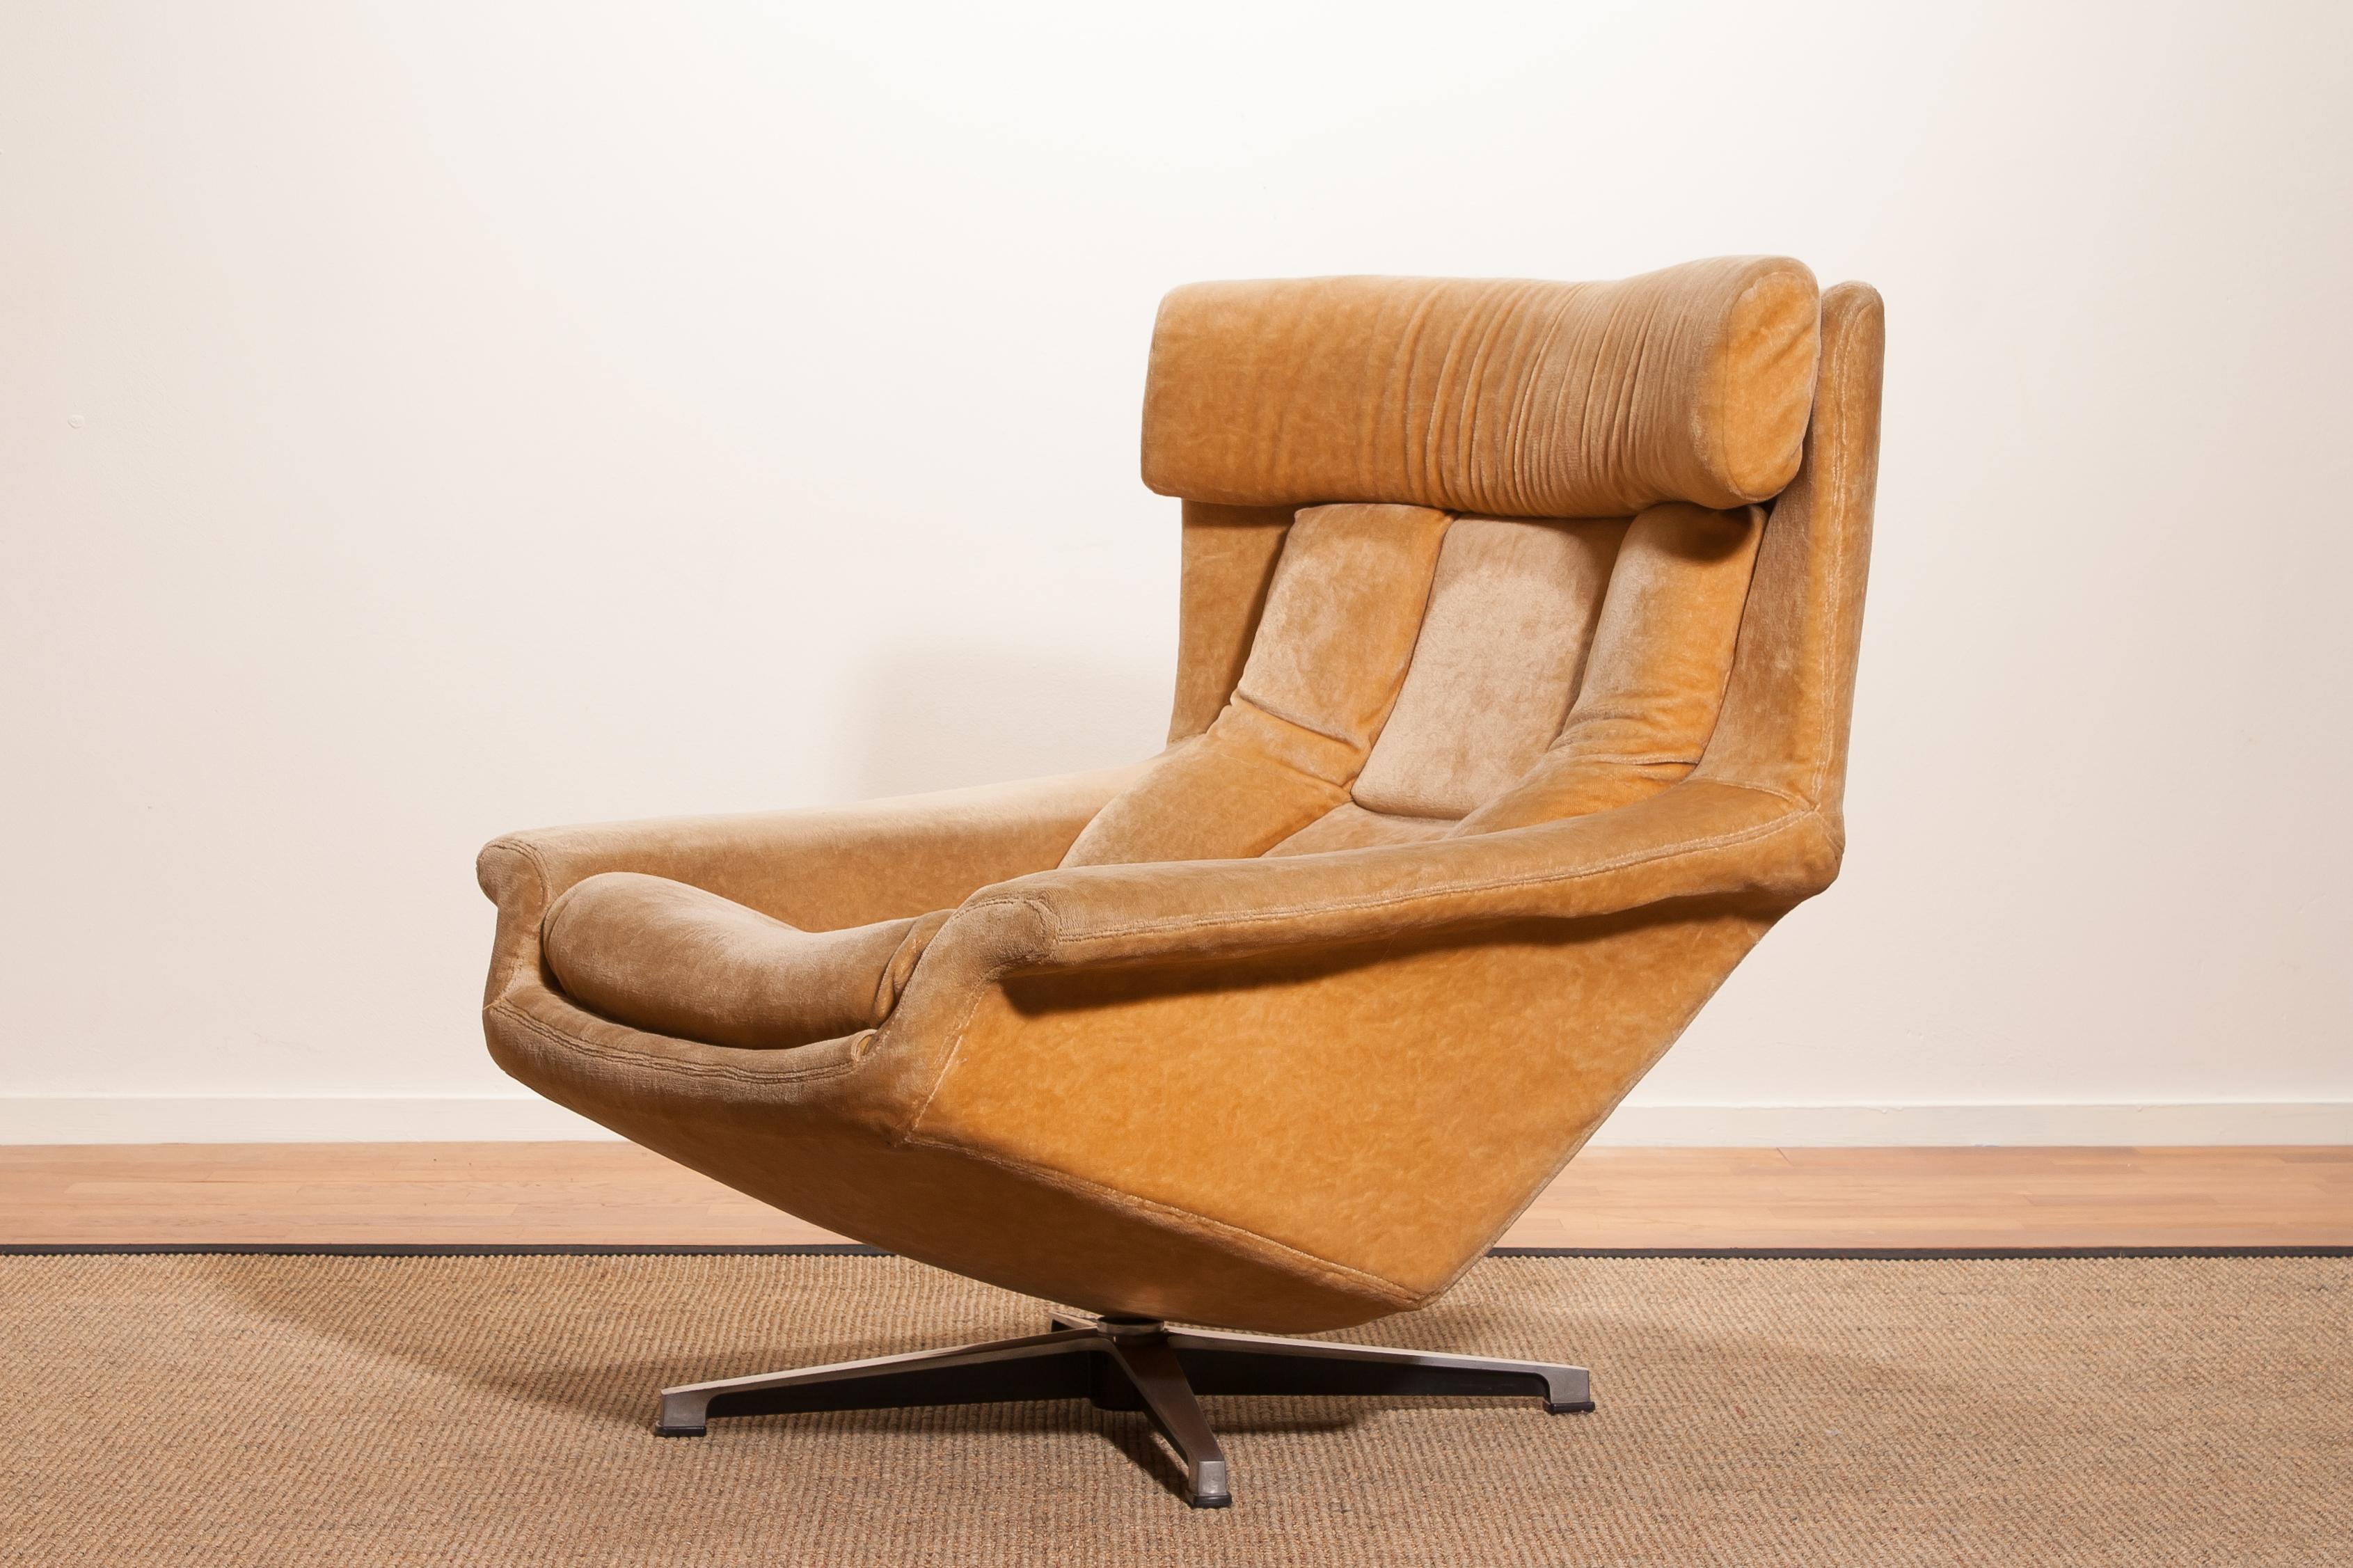 Nice, in original condition, swivel lounge chair made by Bra Bohag AB Sweden.
The seating is upholstered with a golden/beige velvet on a chromed swivel stand.
Period 1960s.
Dimensions: H 85 cm, W 82 cm, D 80 cm, SH 38 cm.